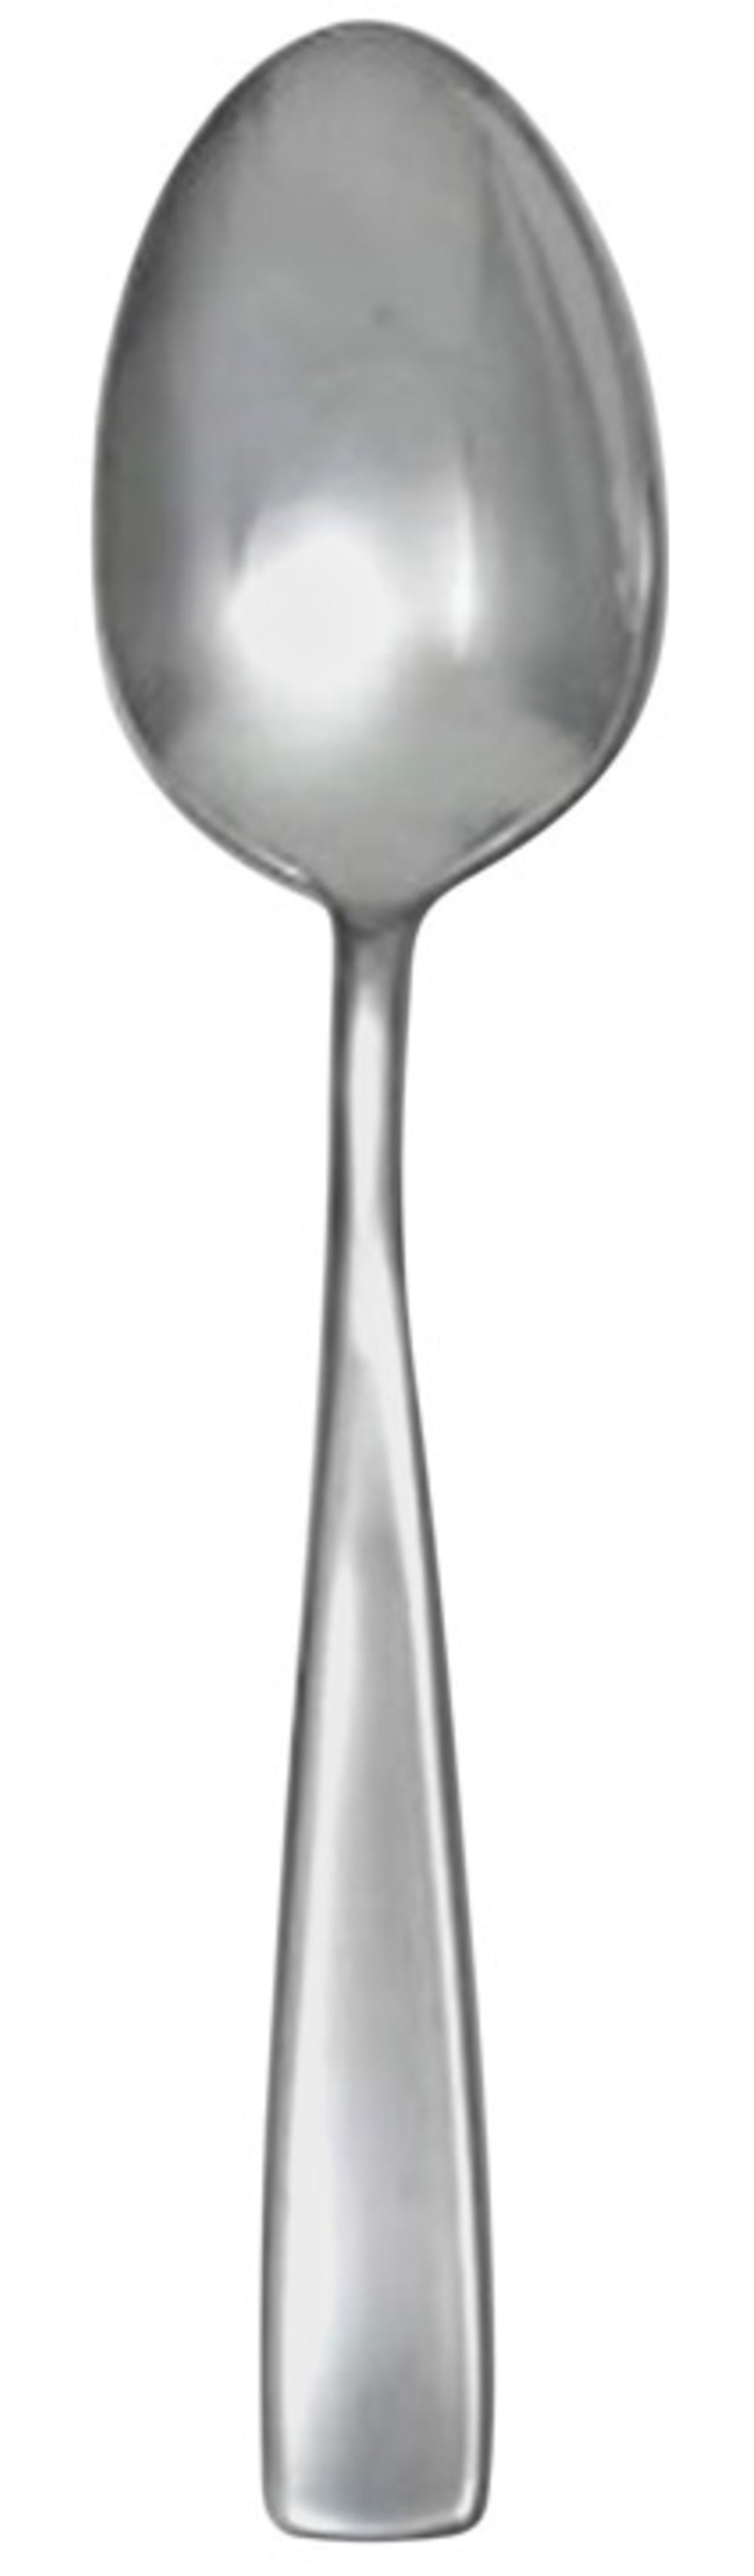 Towle 5131247 Living Basic Square Pattern Serving Spoon, Silver